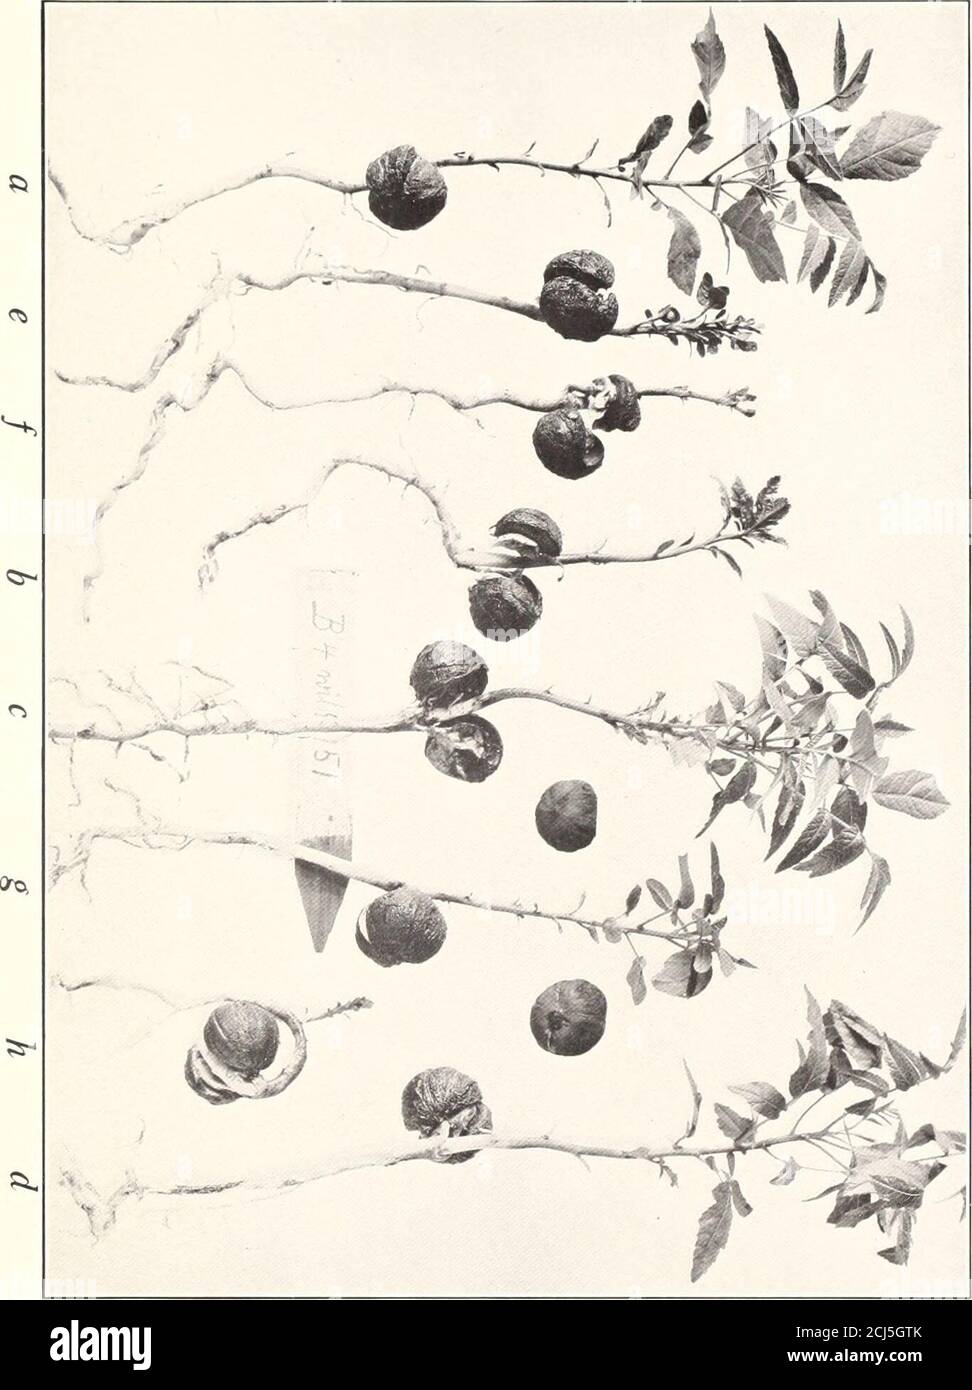 . Studies in Juglans . &lt; o 0 o o o PLATE 15 Juglans californica Watson J. californica var. quercina Babcock Fig. 3.—a, b, c, cl, typical californica seedlings,—e, f, g, h, typicalquercina seedlings. All from the same cluster of abnormal fruits fromtree No. 16 in Garden Grove, Calif. X %. [62]. o&gt; 0CD 3&gt;OXI GO o CD oo o PLATE 16 Juglans californica Watson J. calif ornica v;ir. qu&lt;rcina Babcock Fig. 4.—a, quercina and b, calif ornica seedlings from cluster No. 35 on./. calif ornica tree No. 16 in Garden Grove, Calif. X 1. L64] UNIV. CALIF. PUBL. AGR. SCI. VOL. 2 [BABCOCK] PLATE 16 Stock Photo